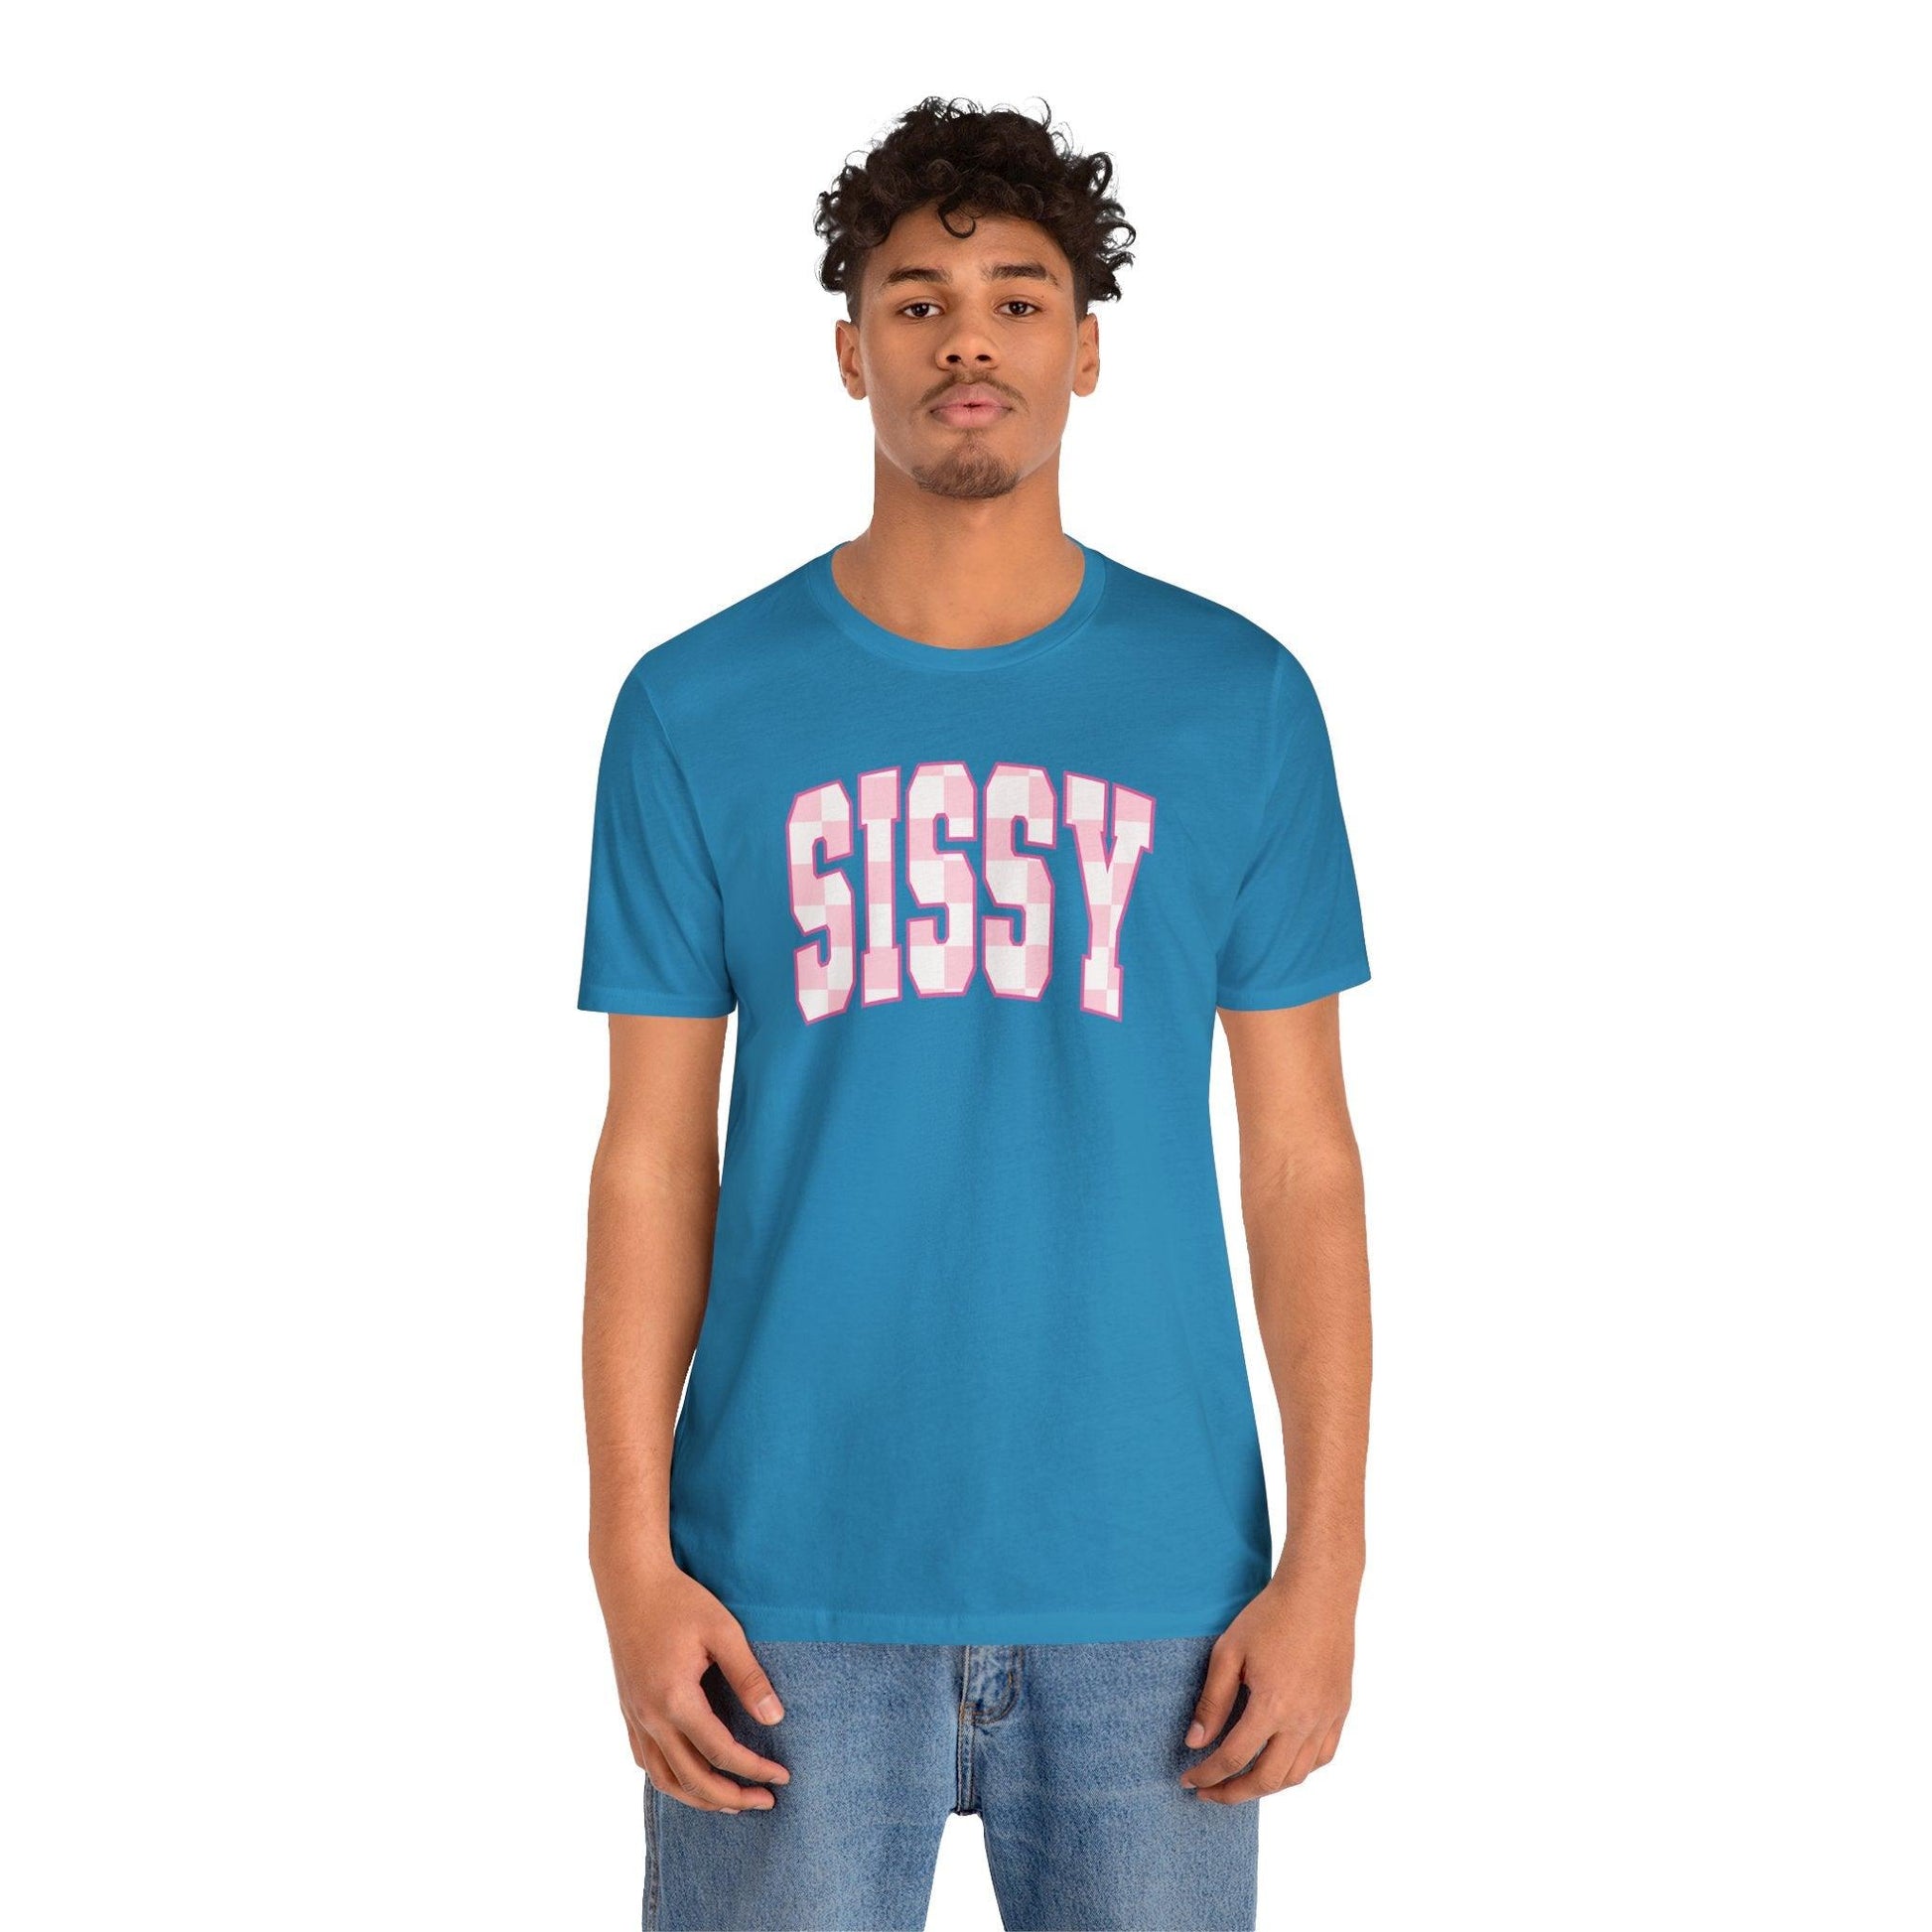 Sissy - Wicked Naughty Apparel